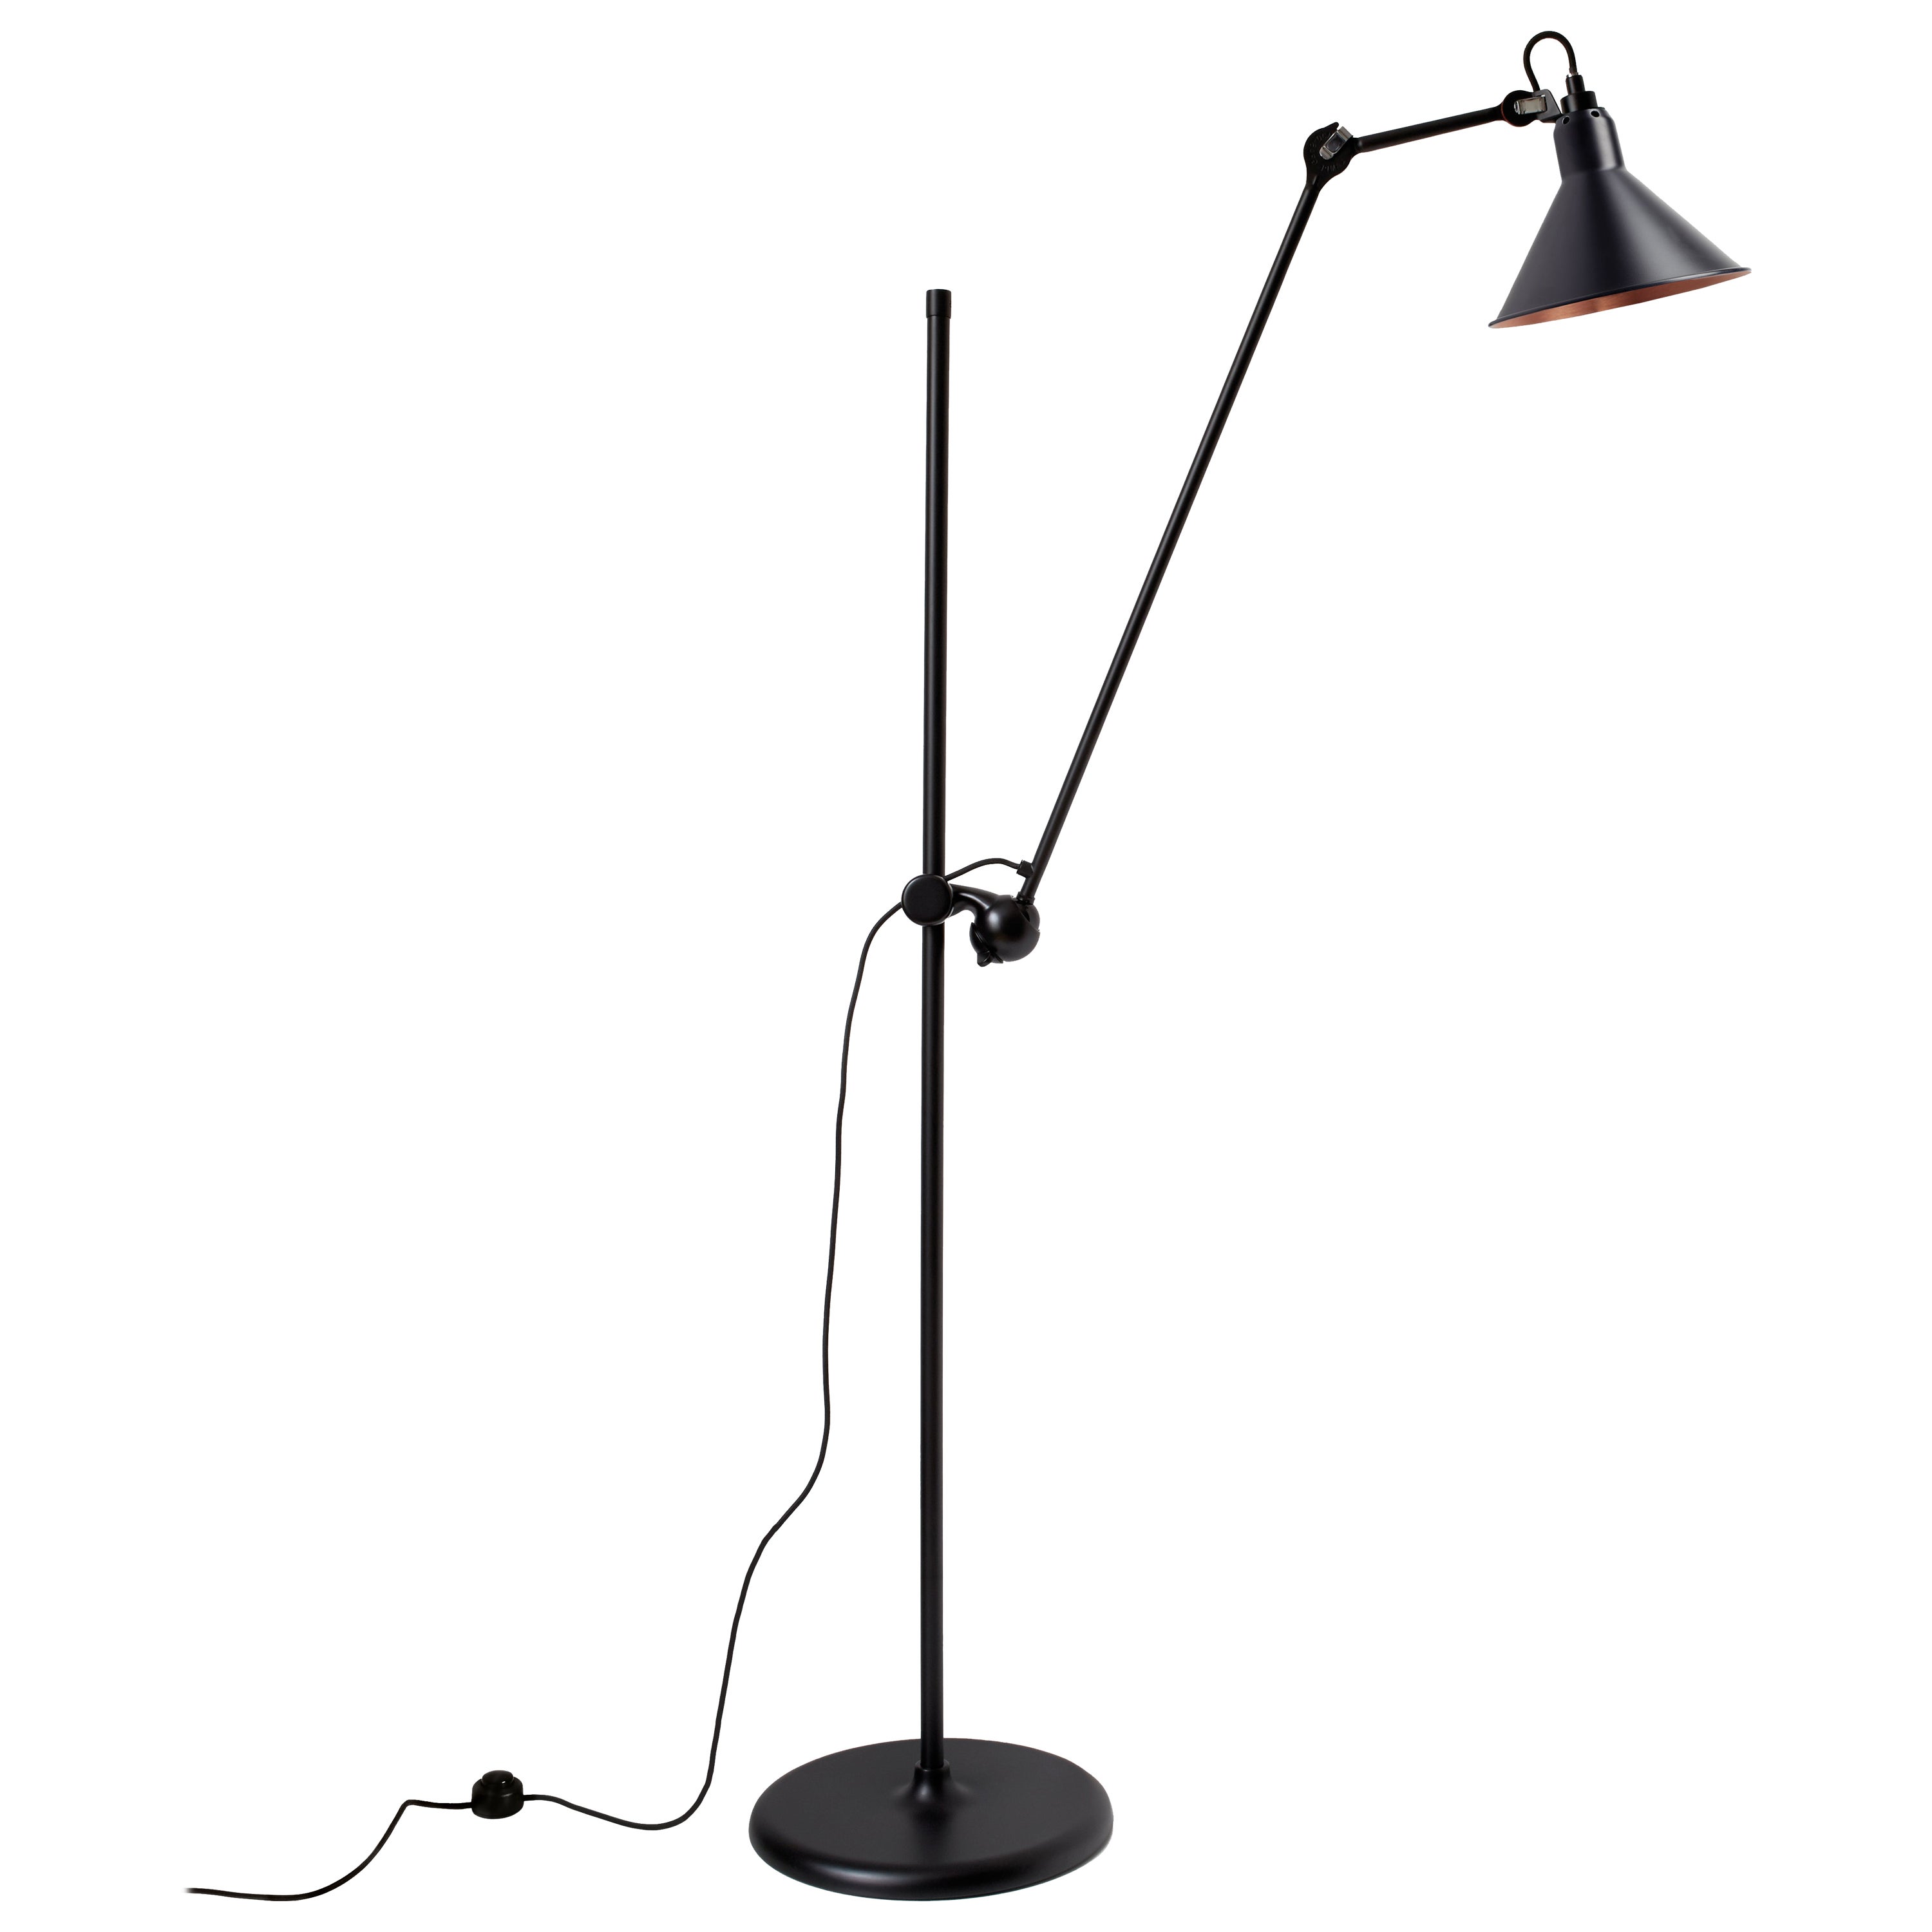 DCW Editions La Lampe Gras N°215 Floor Lamp in Black Arm and Black Copper Shade For Sale